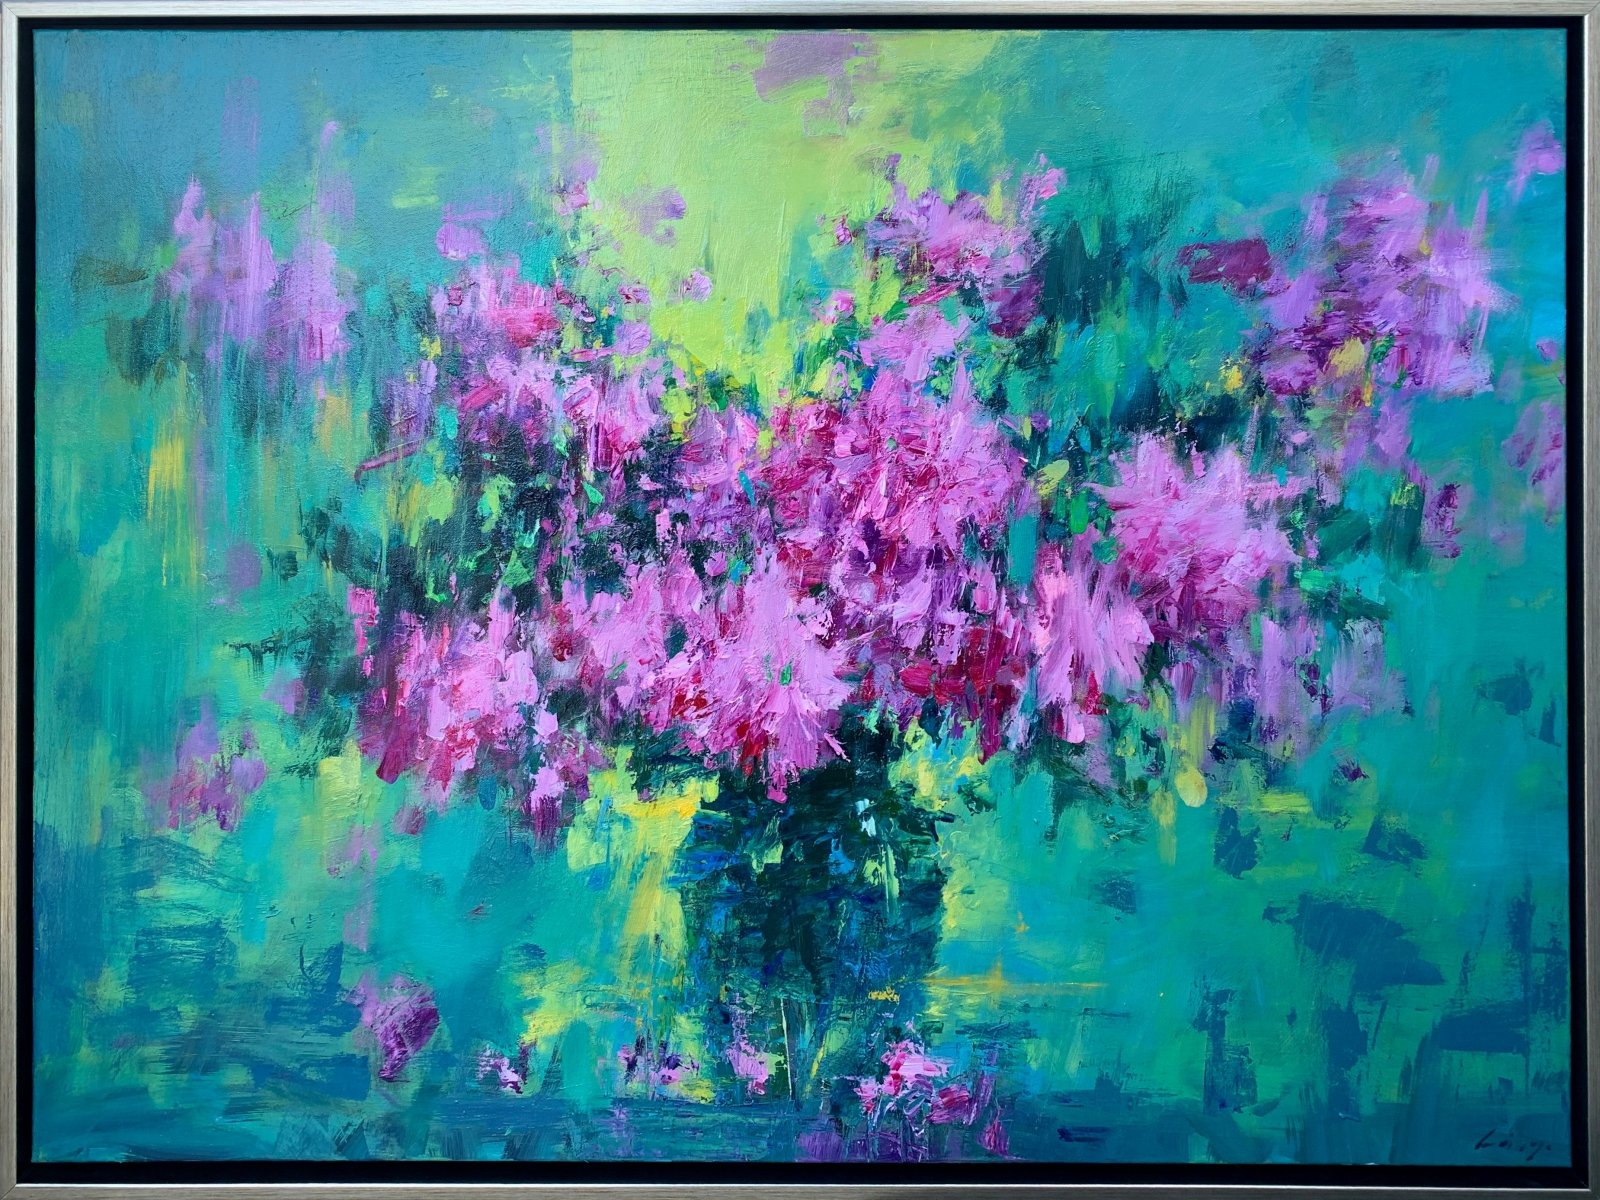 Spring Flowers by Ning Lee at LePrince Galleries